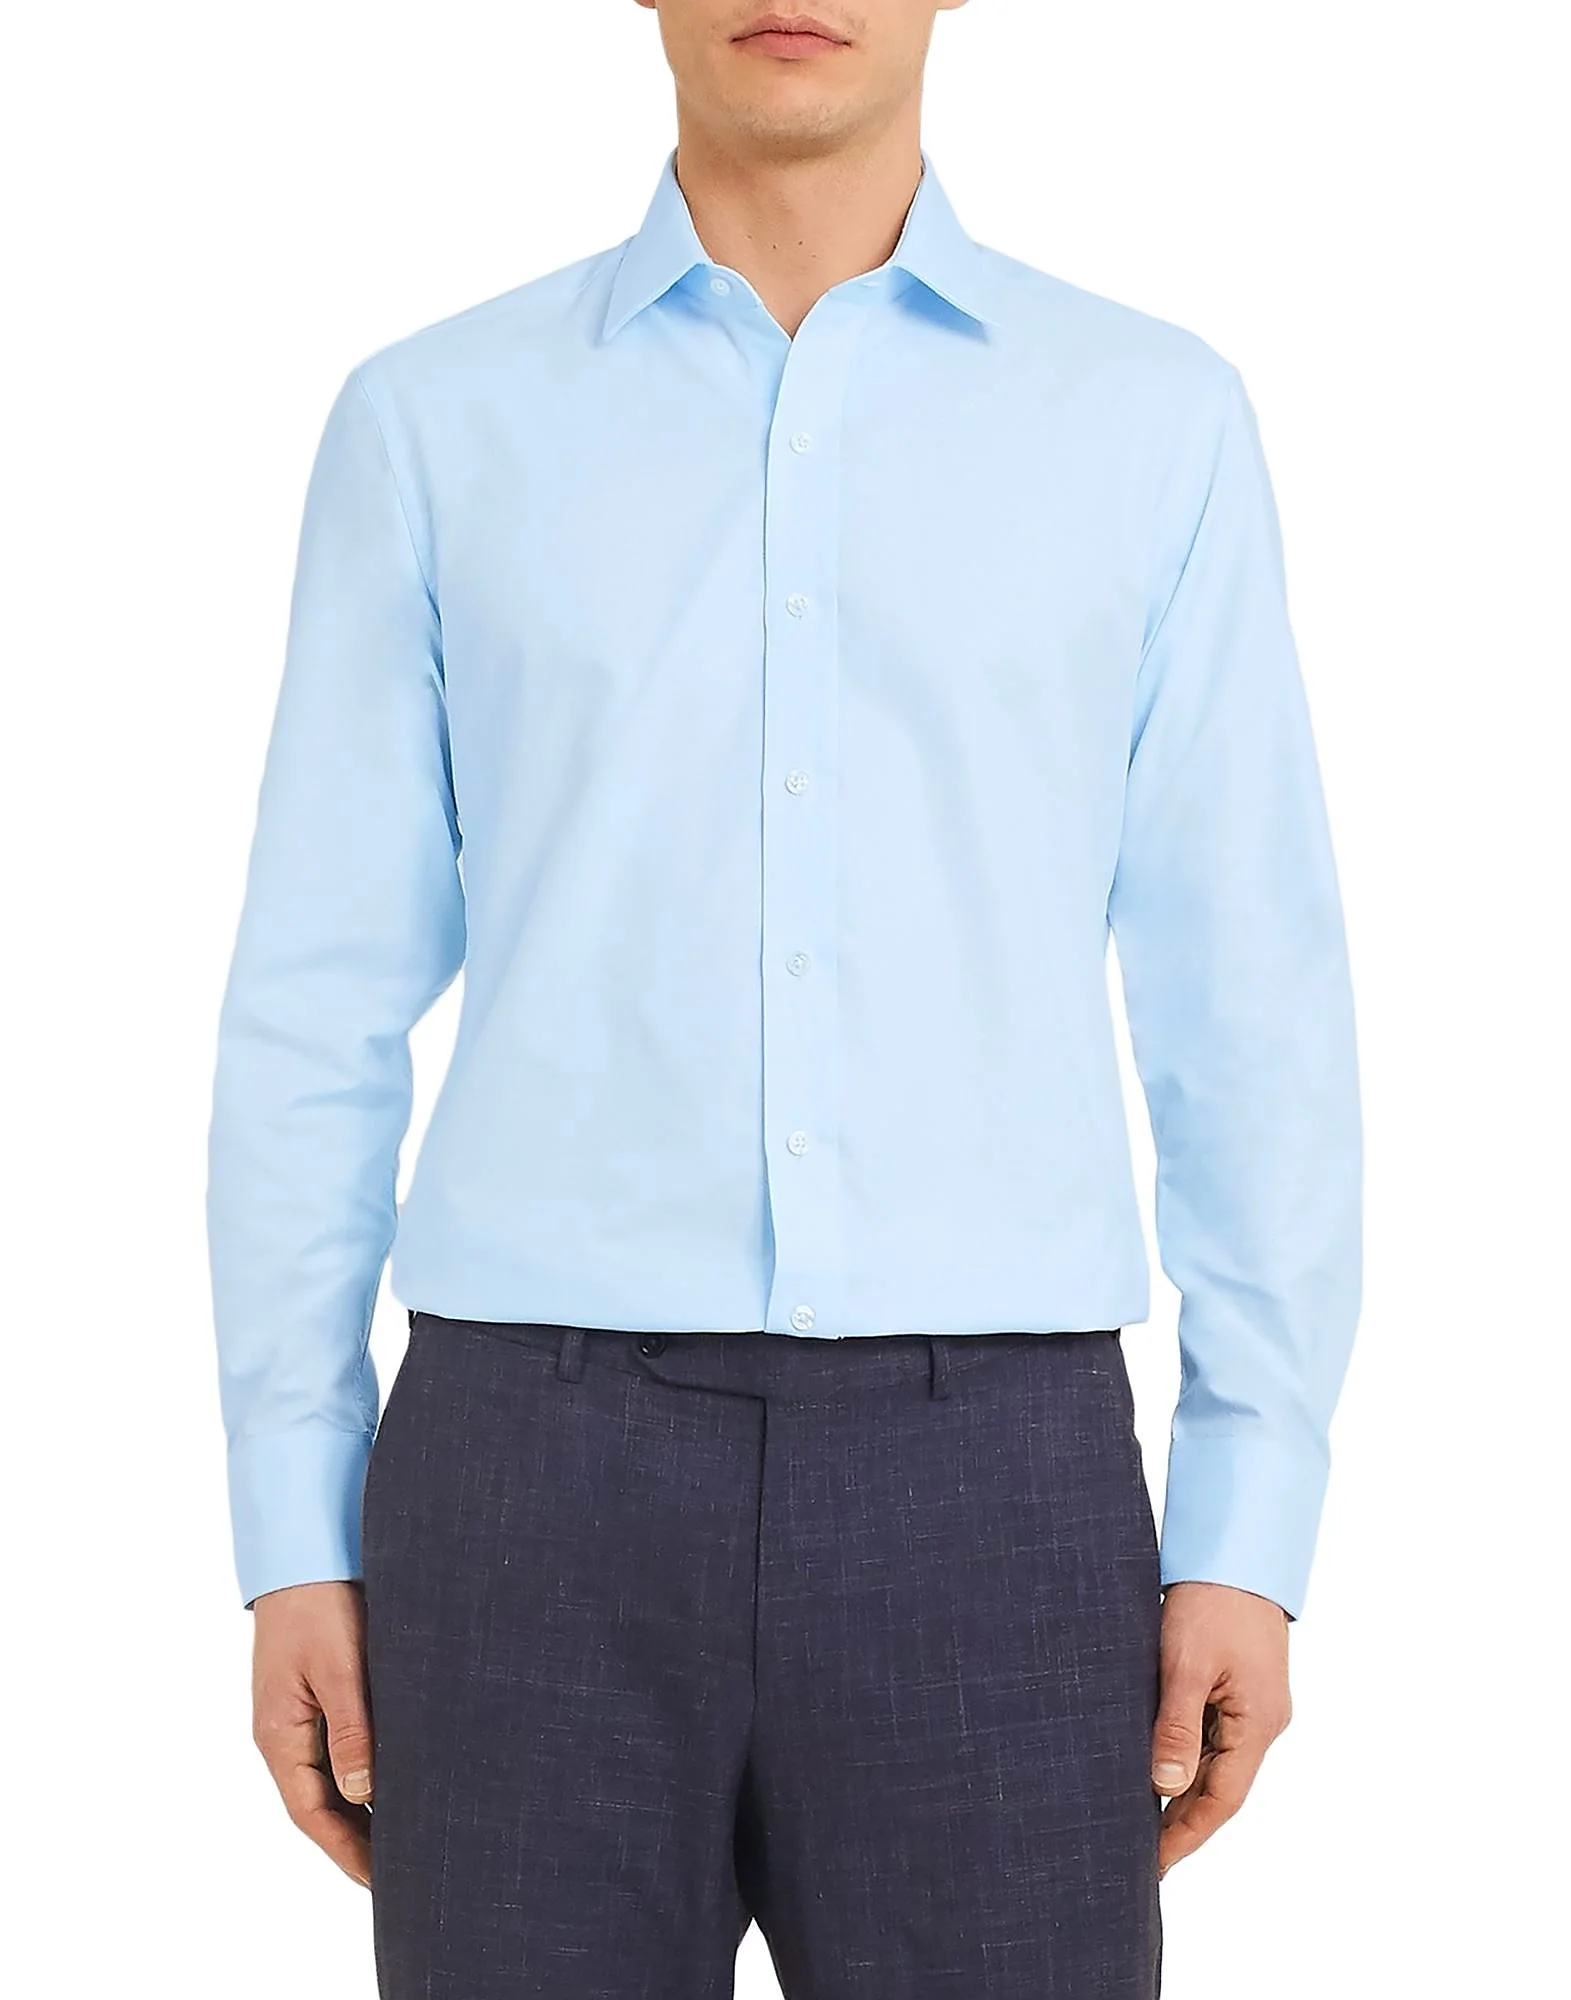 Corporate Shirts - Bangladesh Factory, Suppliers, Manufacturers